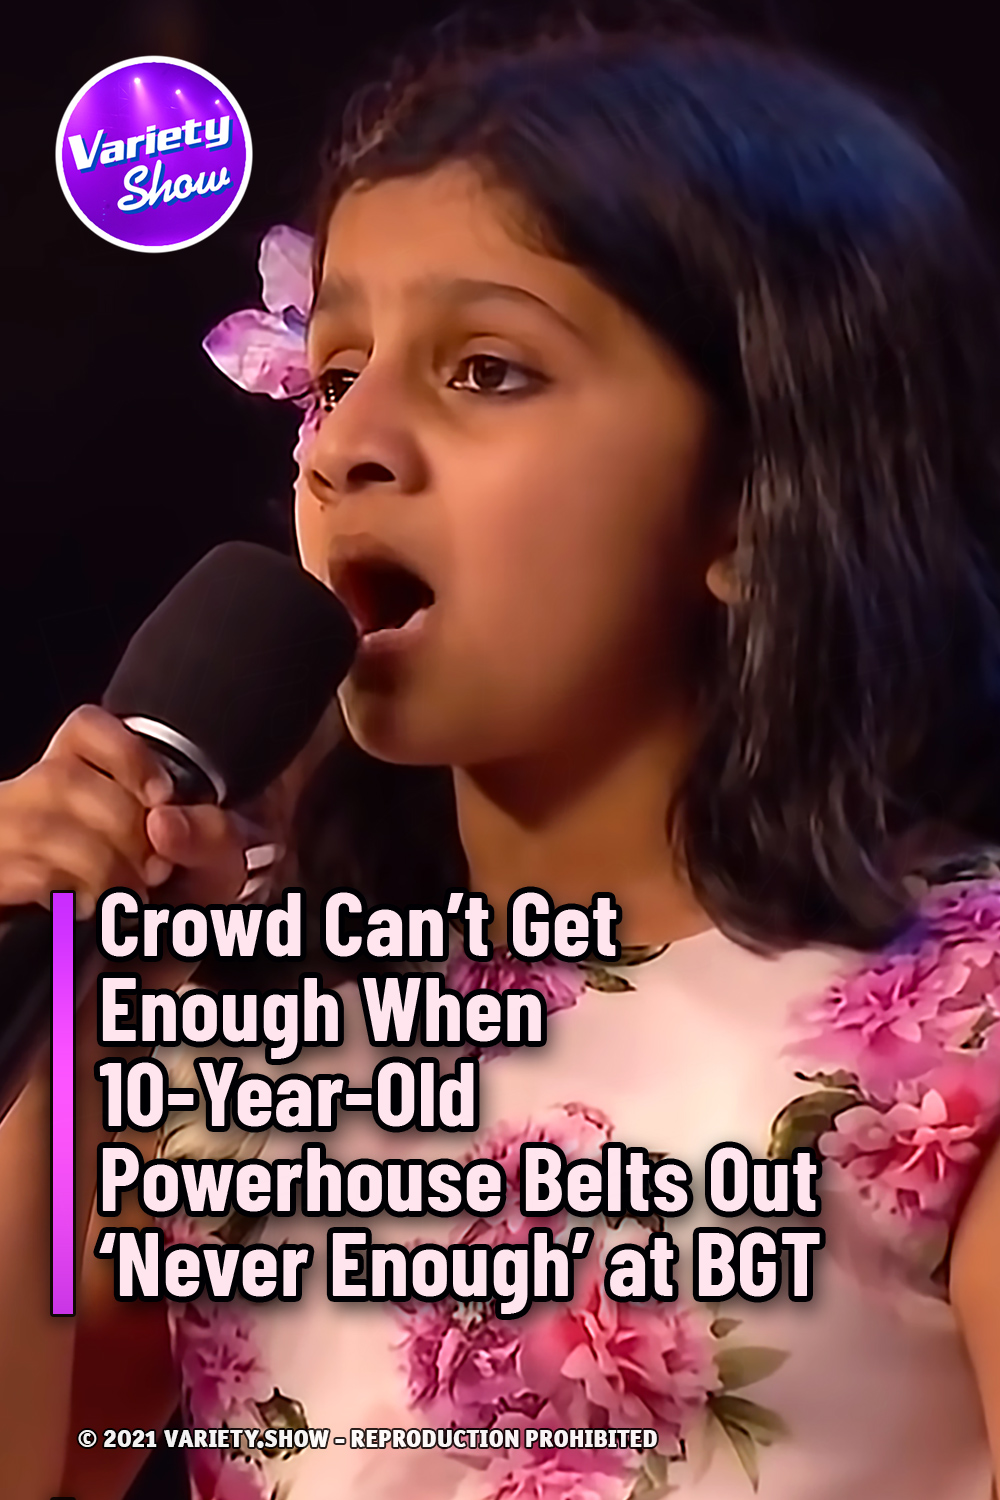 Crowd Can’t Get Enough When 10-Year-Old Powerhouse Belts Out ‘Never Enough’ at BGT